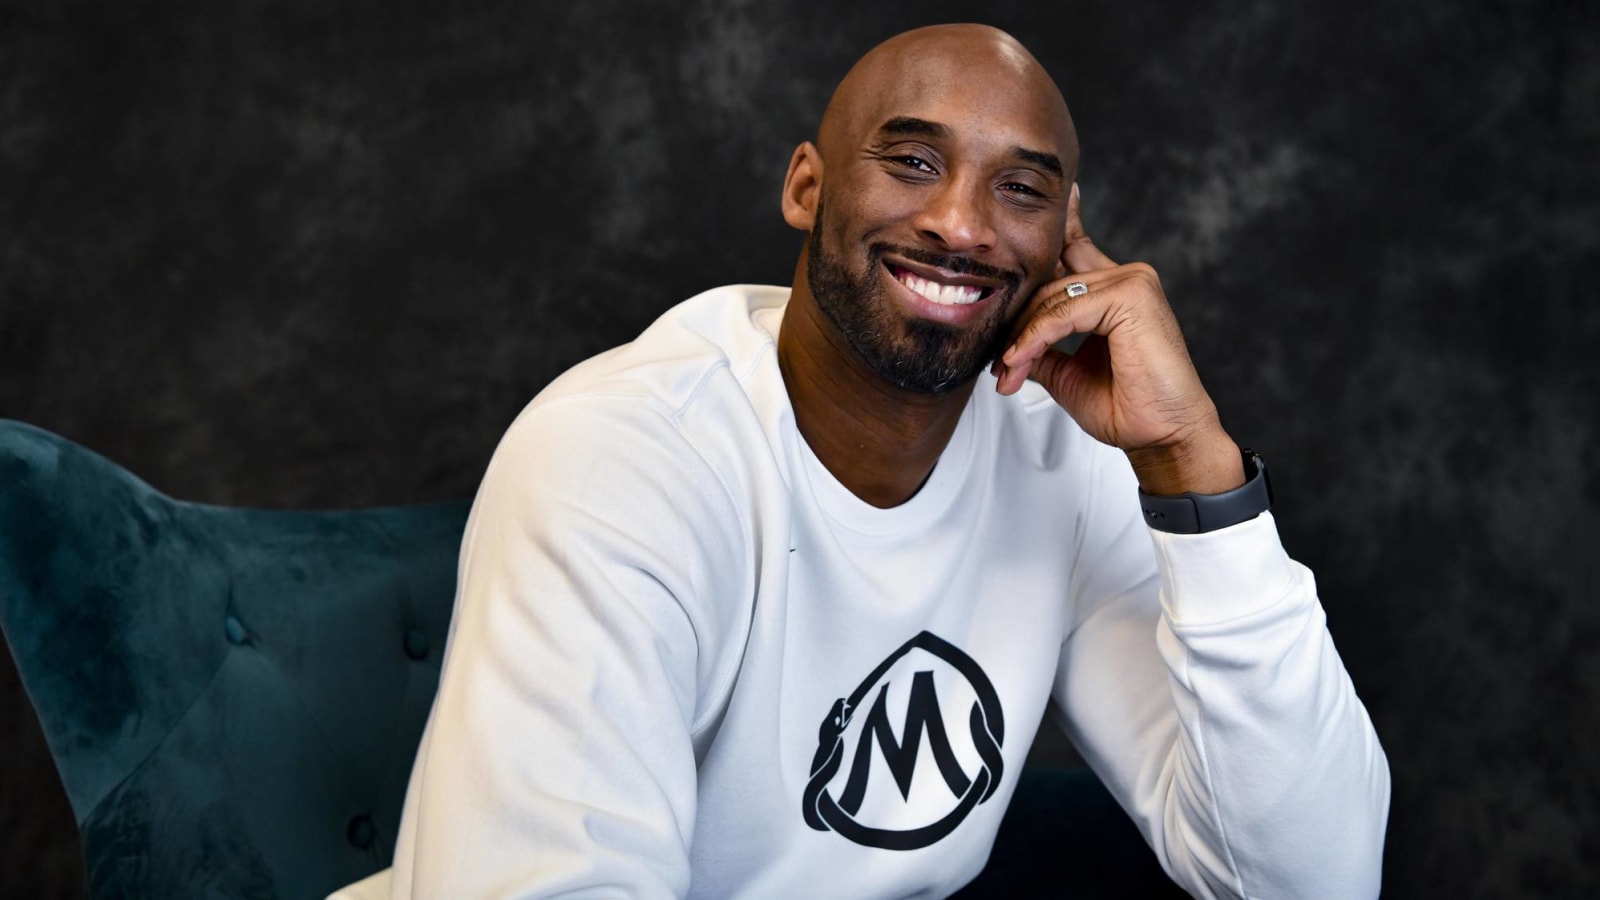 Instagram honors Kobe Bryant with new update to personal profile